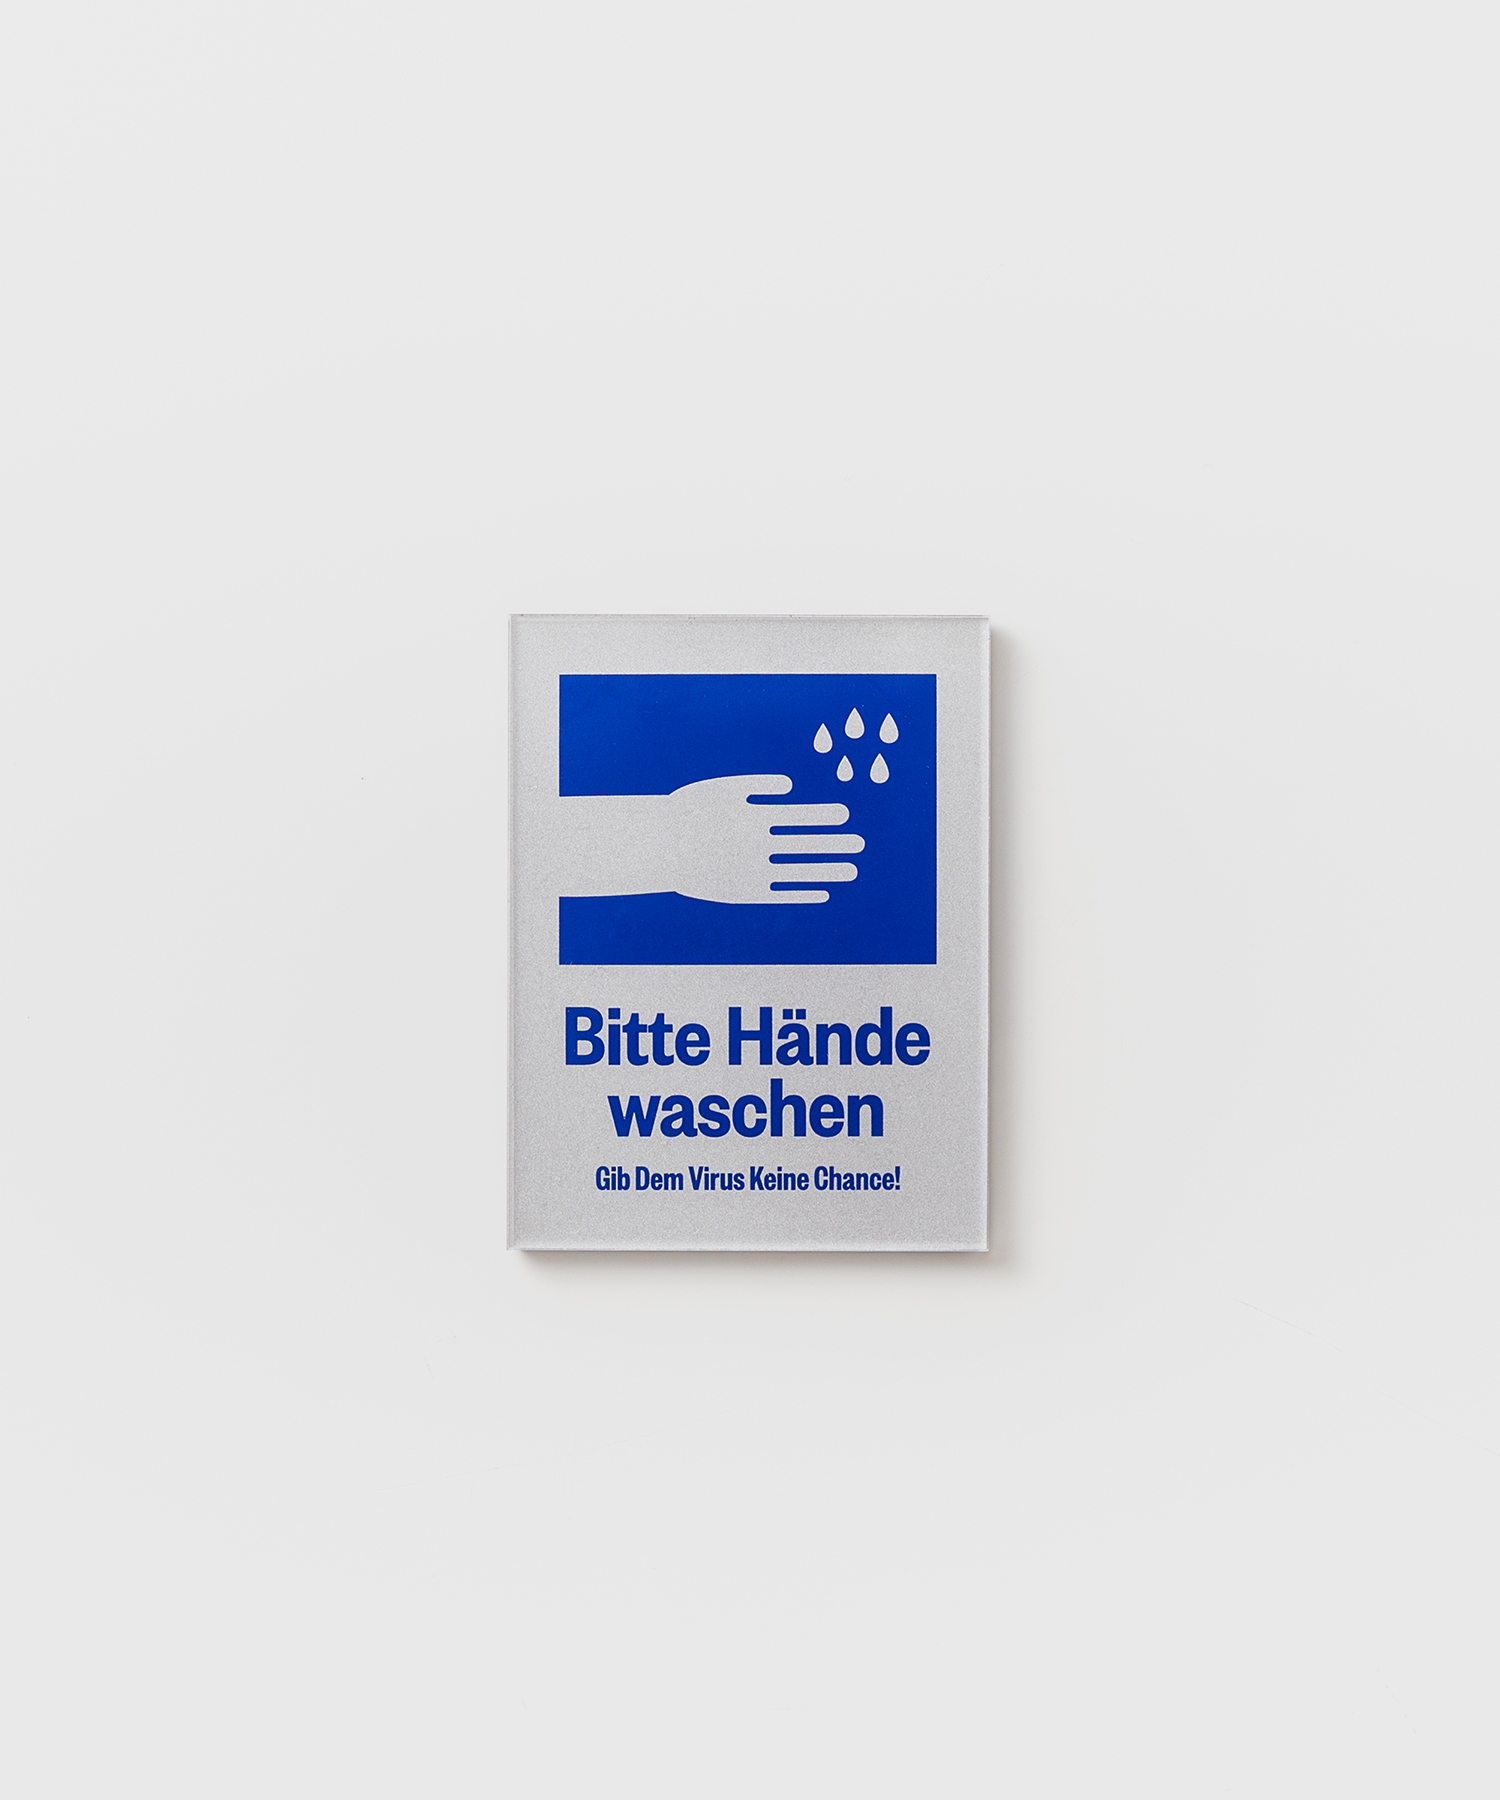 Magnet Plate (Please wash your hands)